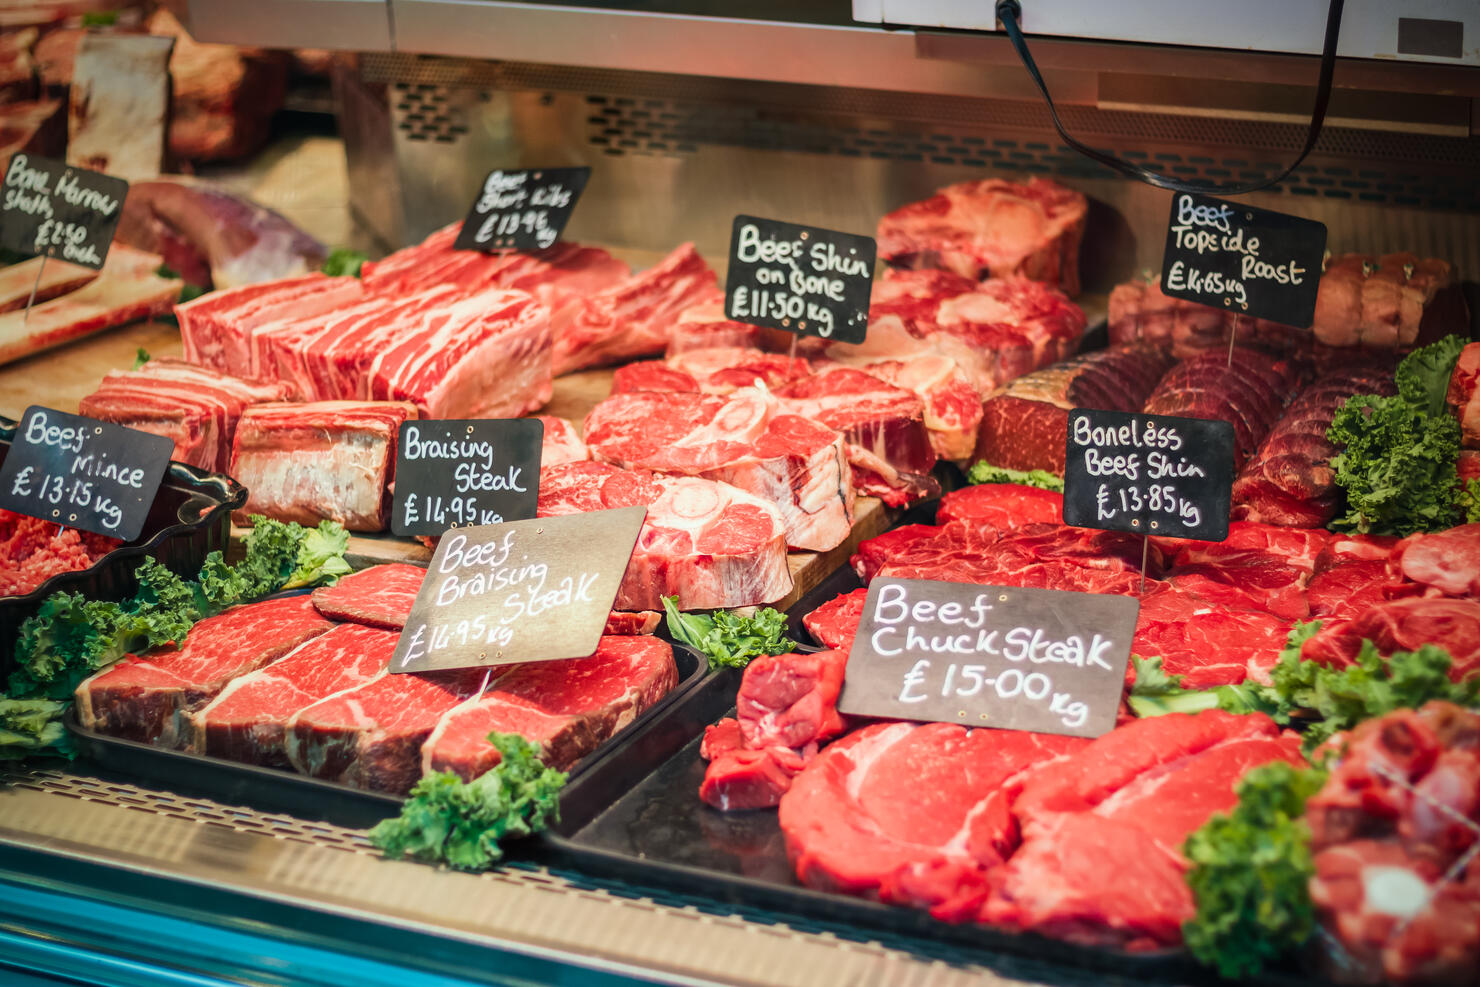 Counter of a butcher's shop in Borough Market in London, England